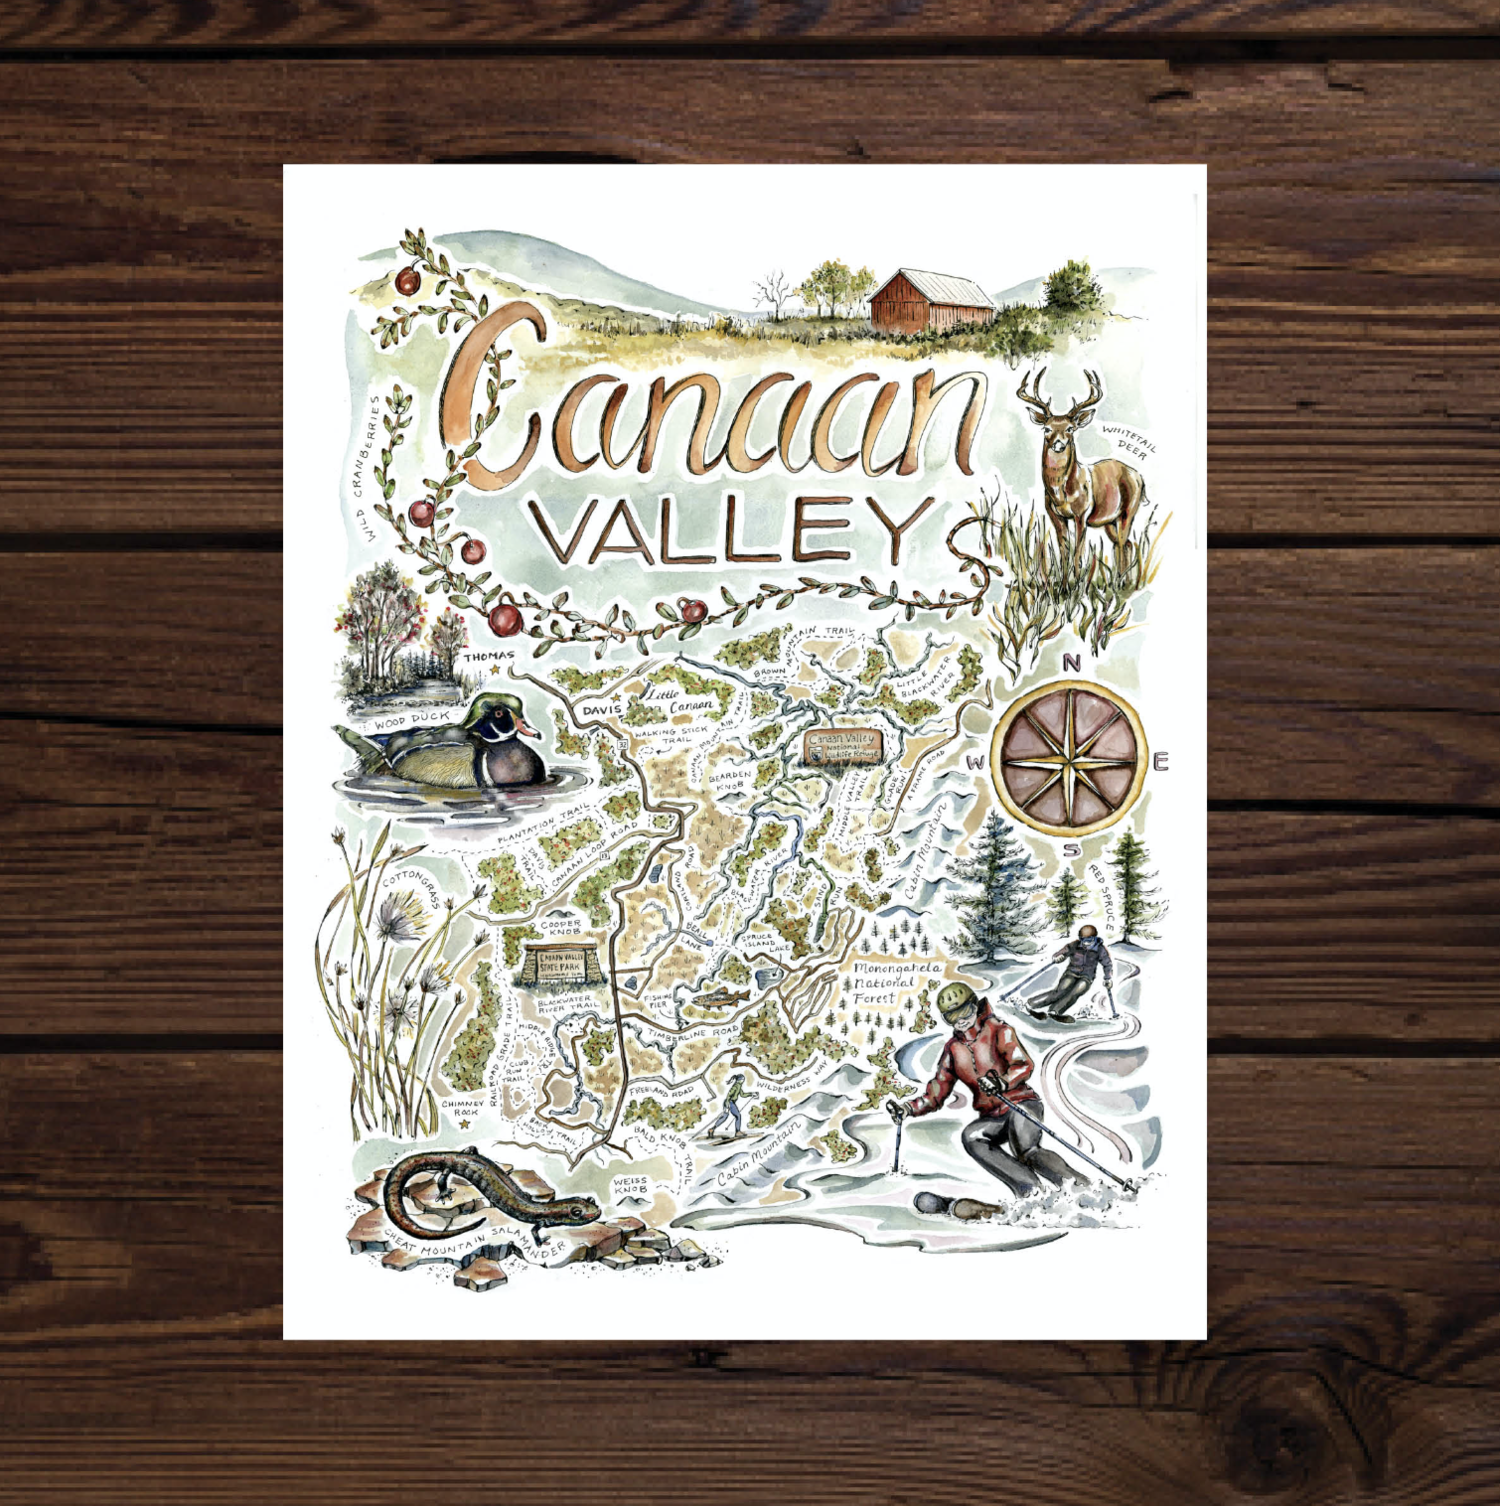 Illustrated hiking map of Canaan Valley, West Virginia.